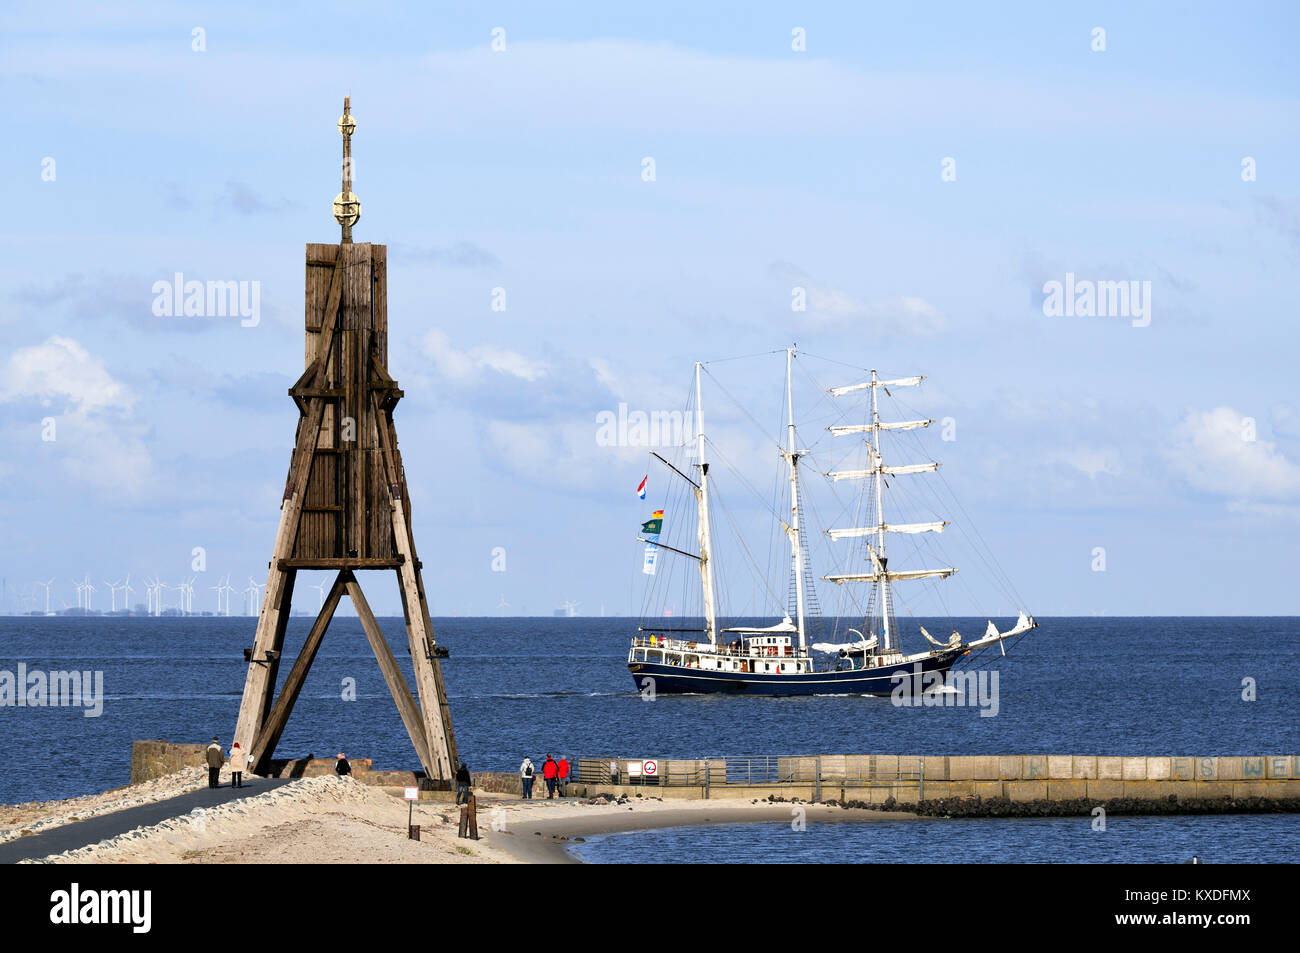 Kugelbake with sailing ship on the Elbe,mouth of the Elbe into the North Sea,landmark of the city of Cuxhaven,Lower Saxony Stock Photo